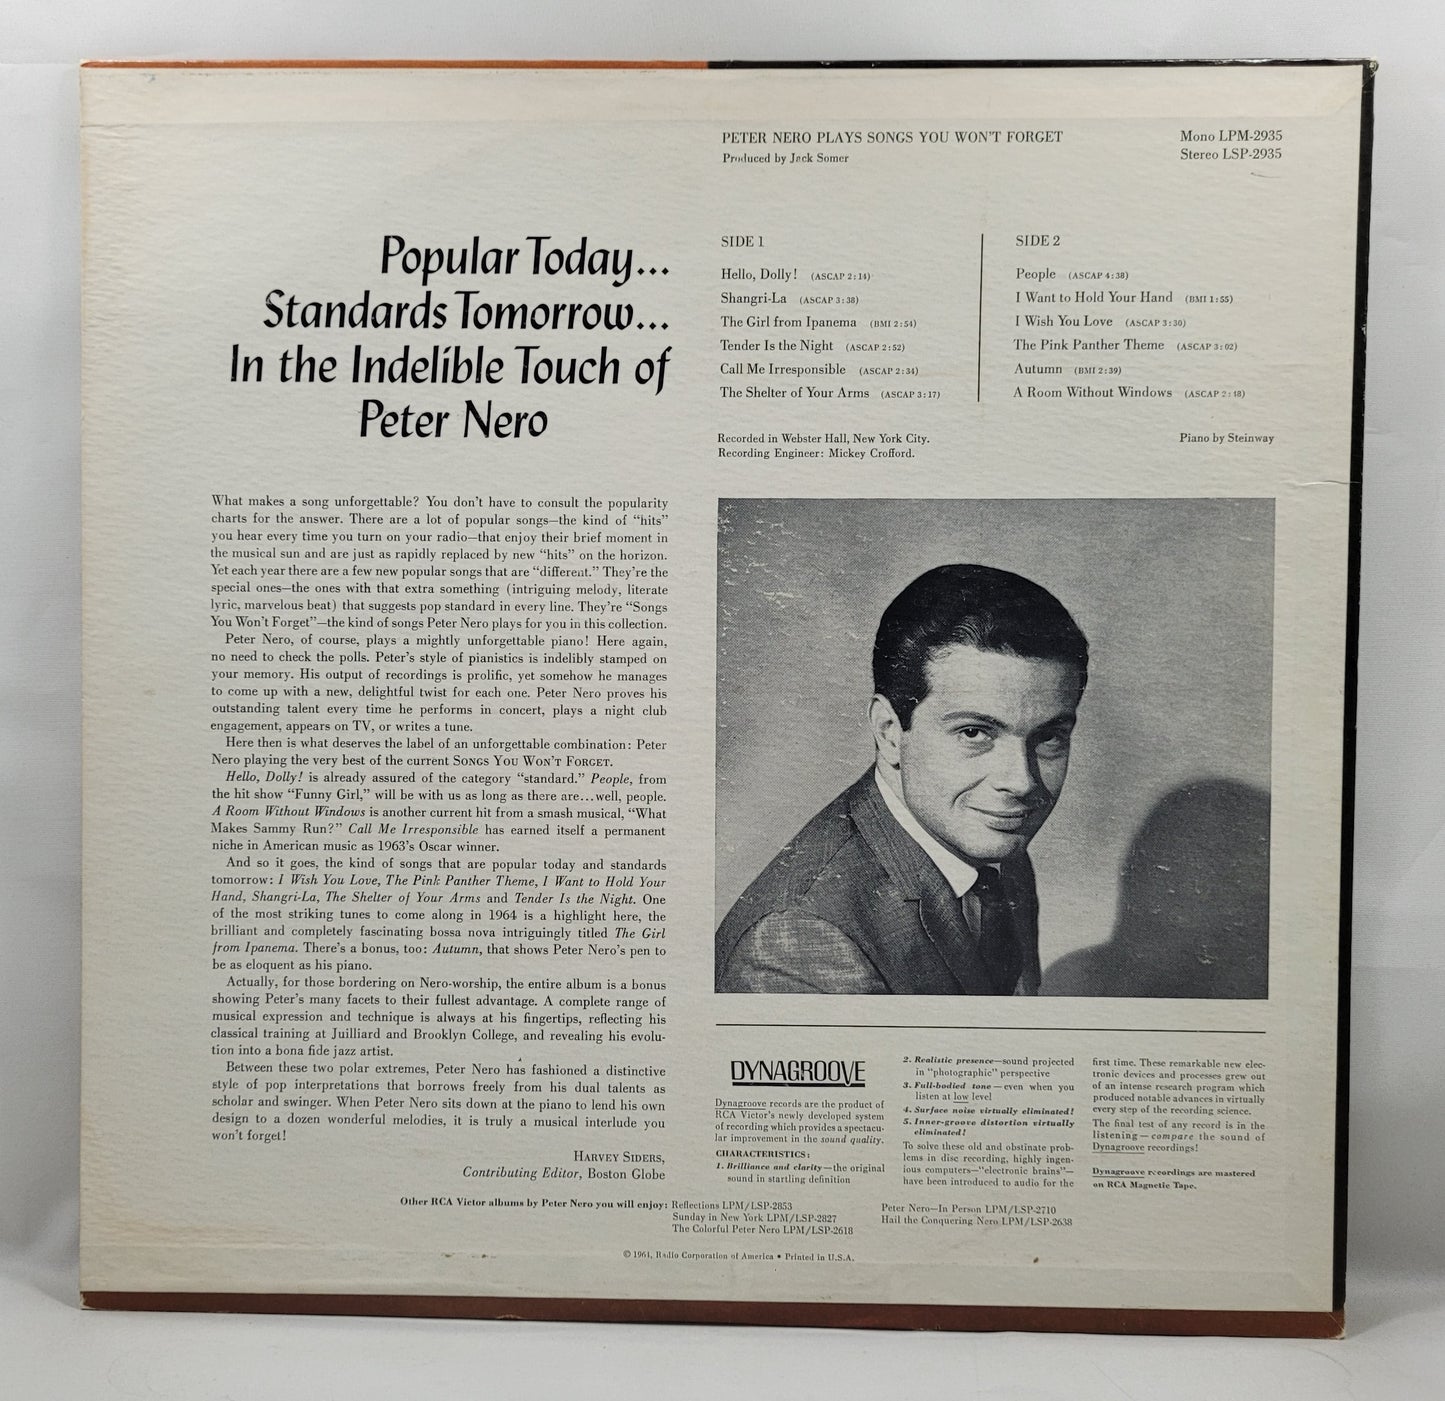 Peter Nero - Peter Nero Plays Songs You Won't Forget [Vinyl Record LP]